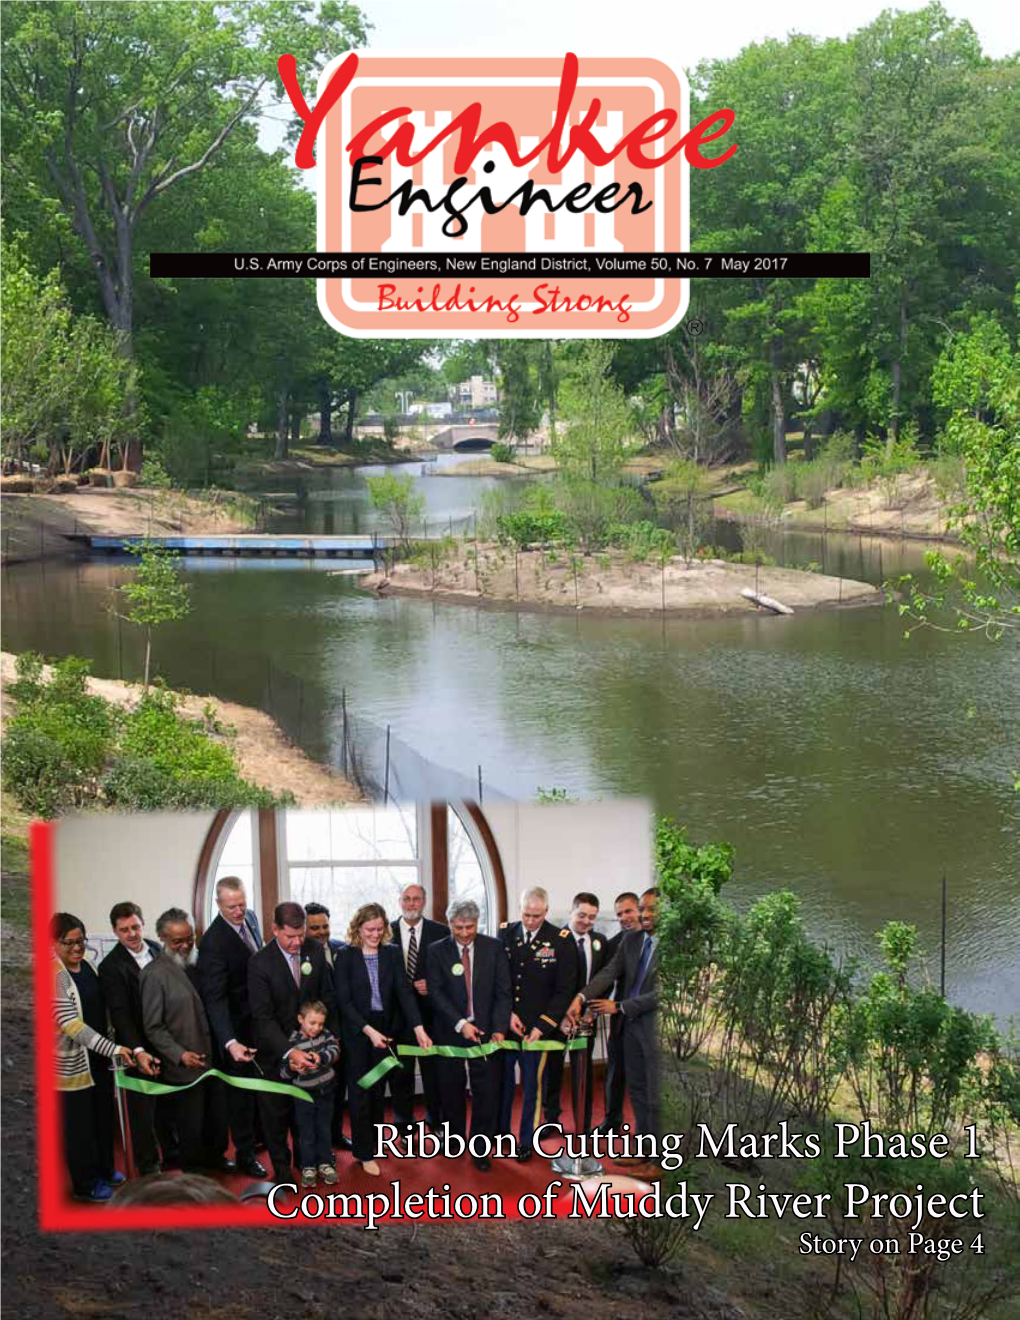 Ribbon Cutting Marks Phase 1 Completion of Muddy River Project Story on Page 4 YANKEE ENGINEER 2 May 2017 Yankee